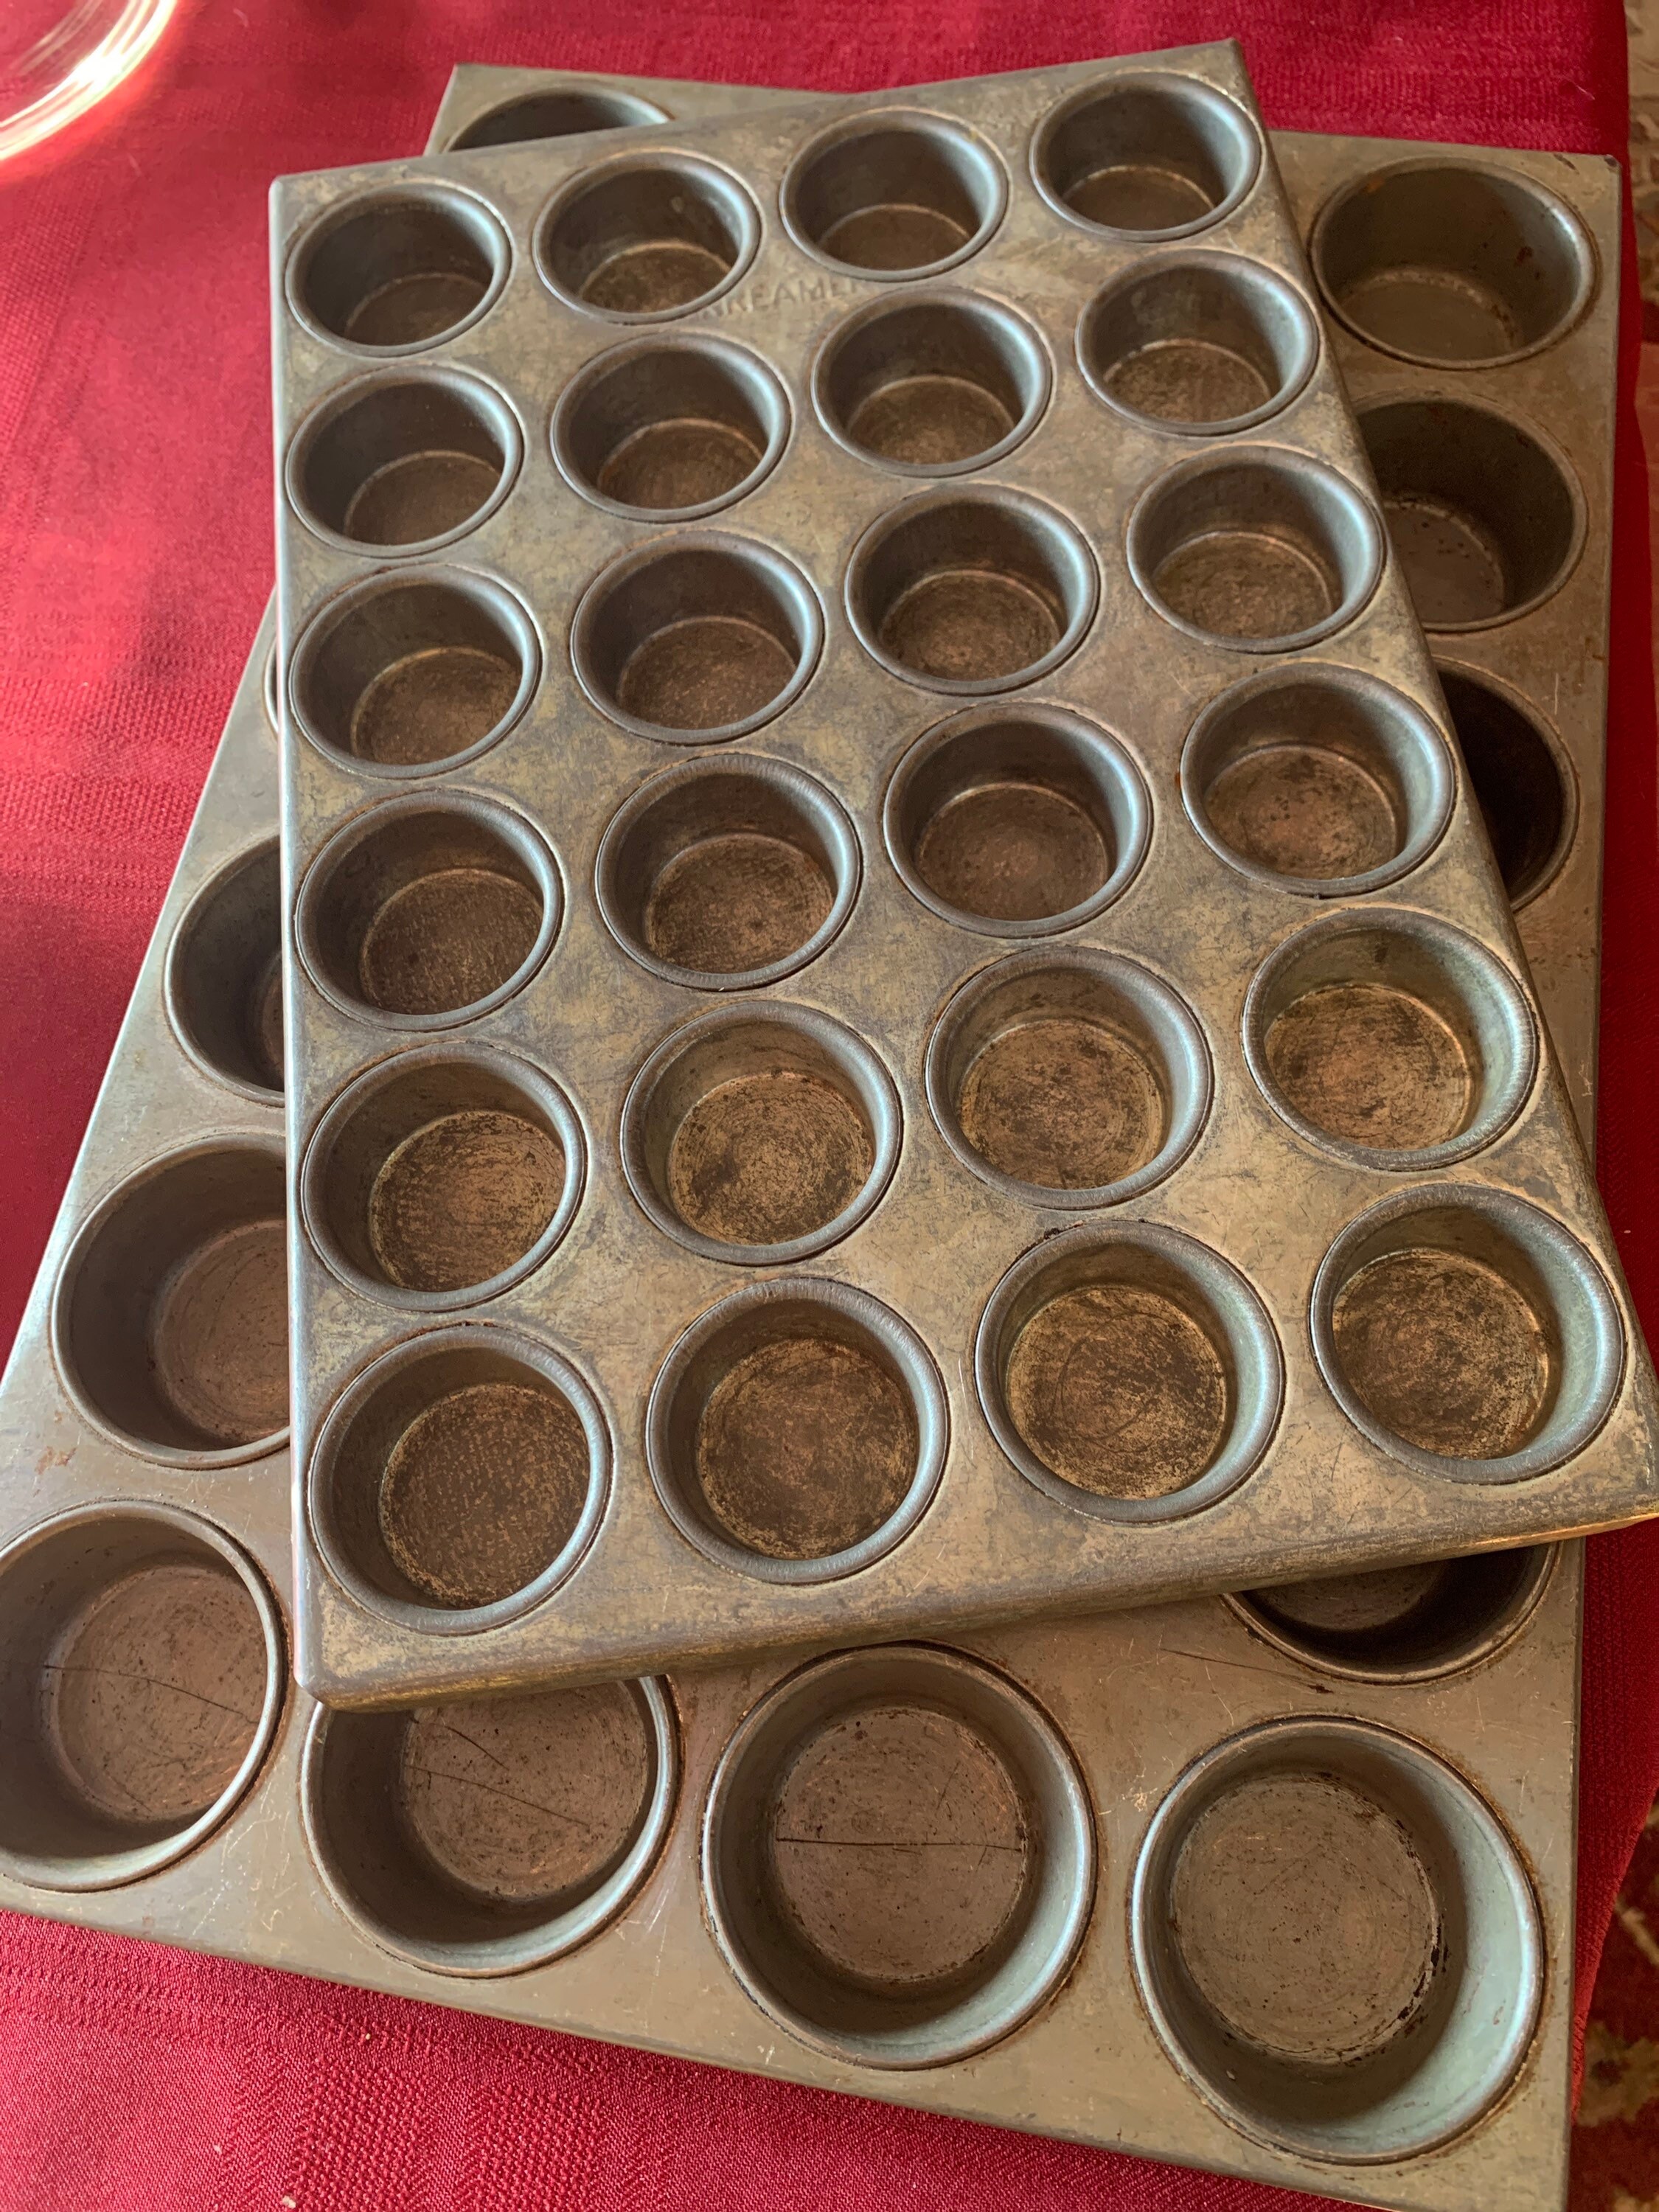 Vintage Kreamer 24 Slot Heavy Duty Cupcake Muffin Pan Collectible